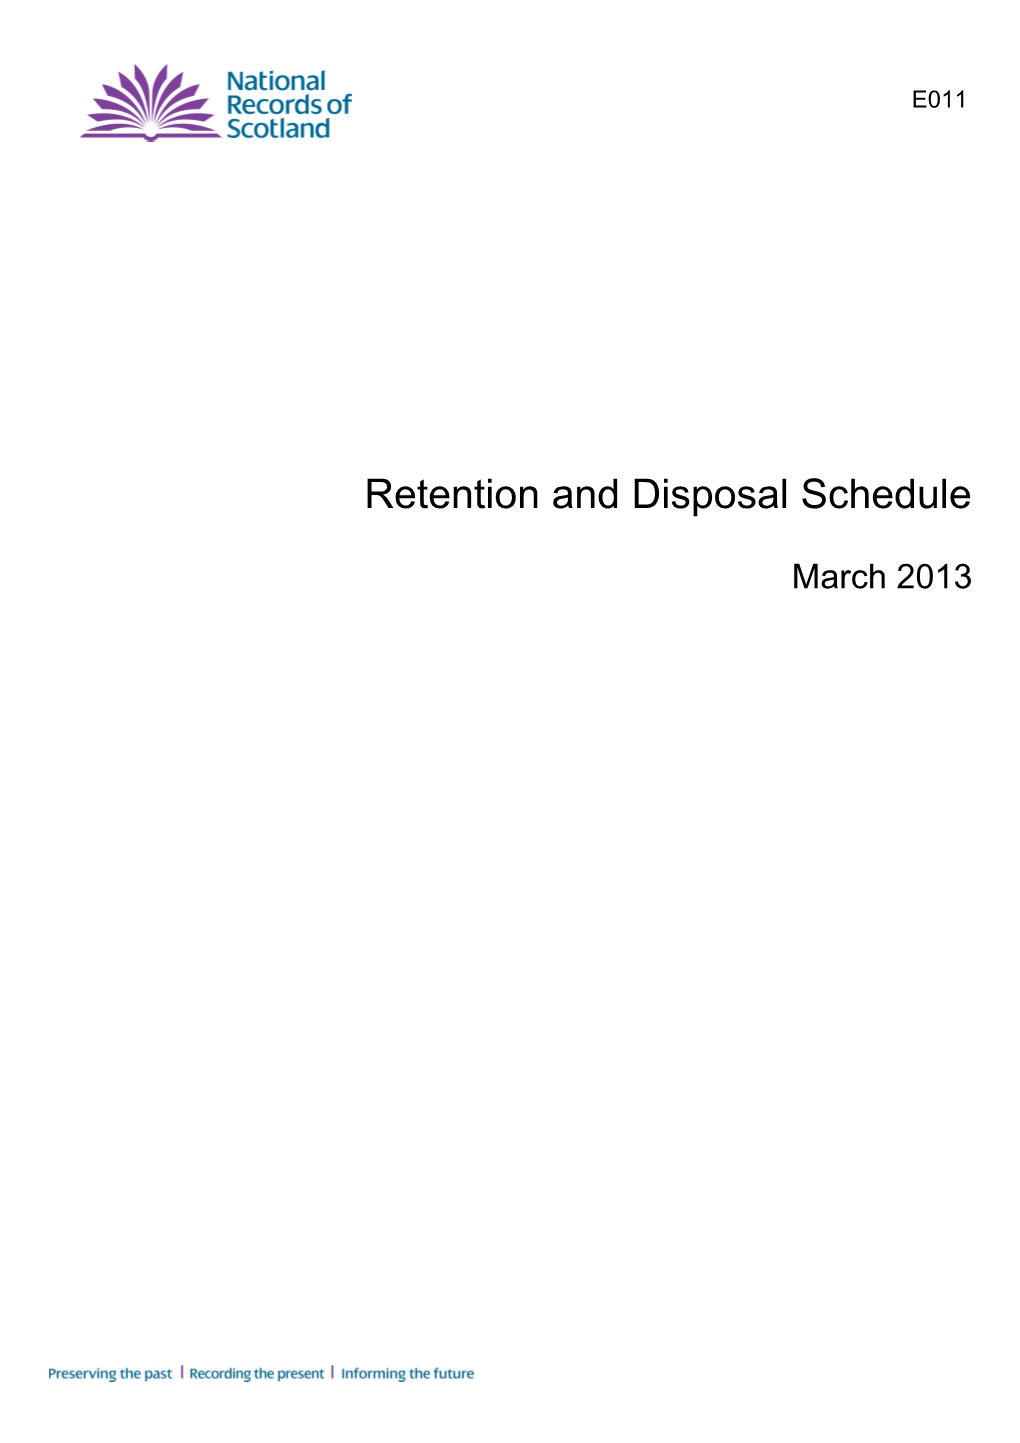 Retention and Disposal Schedule